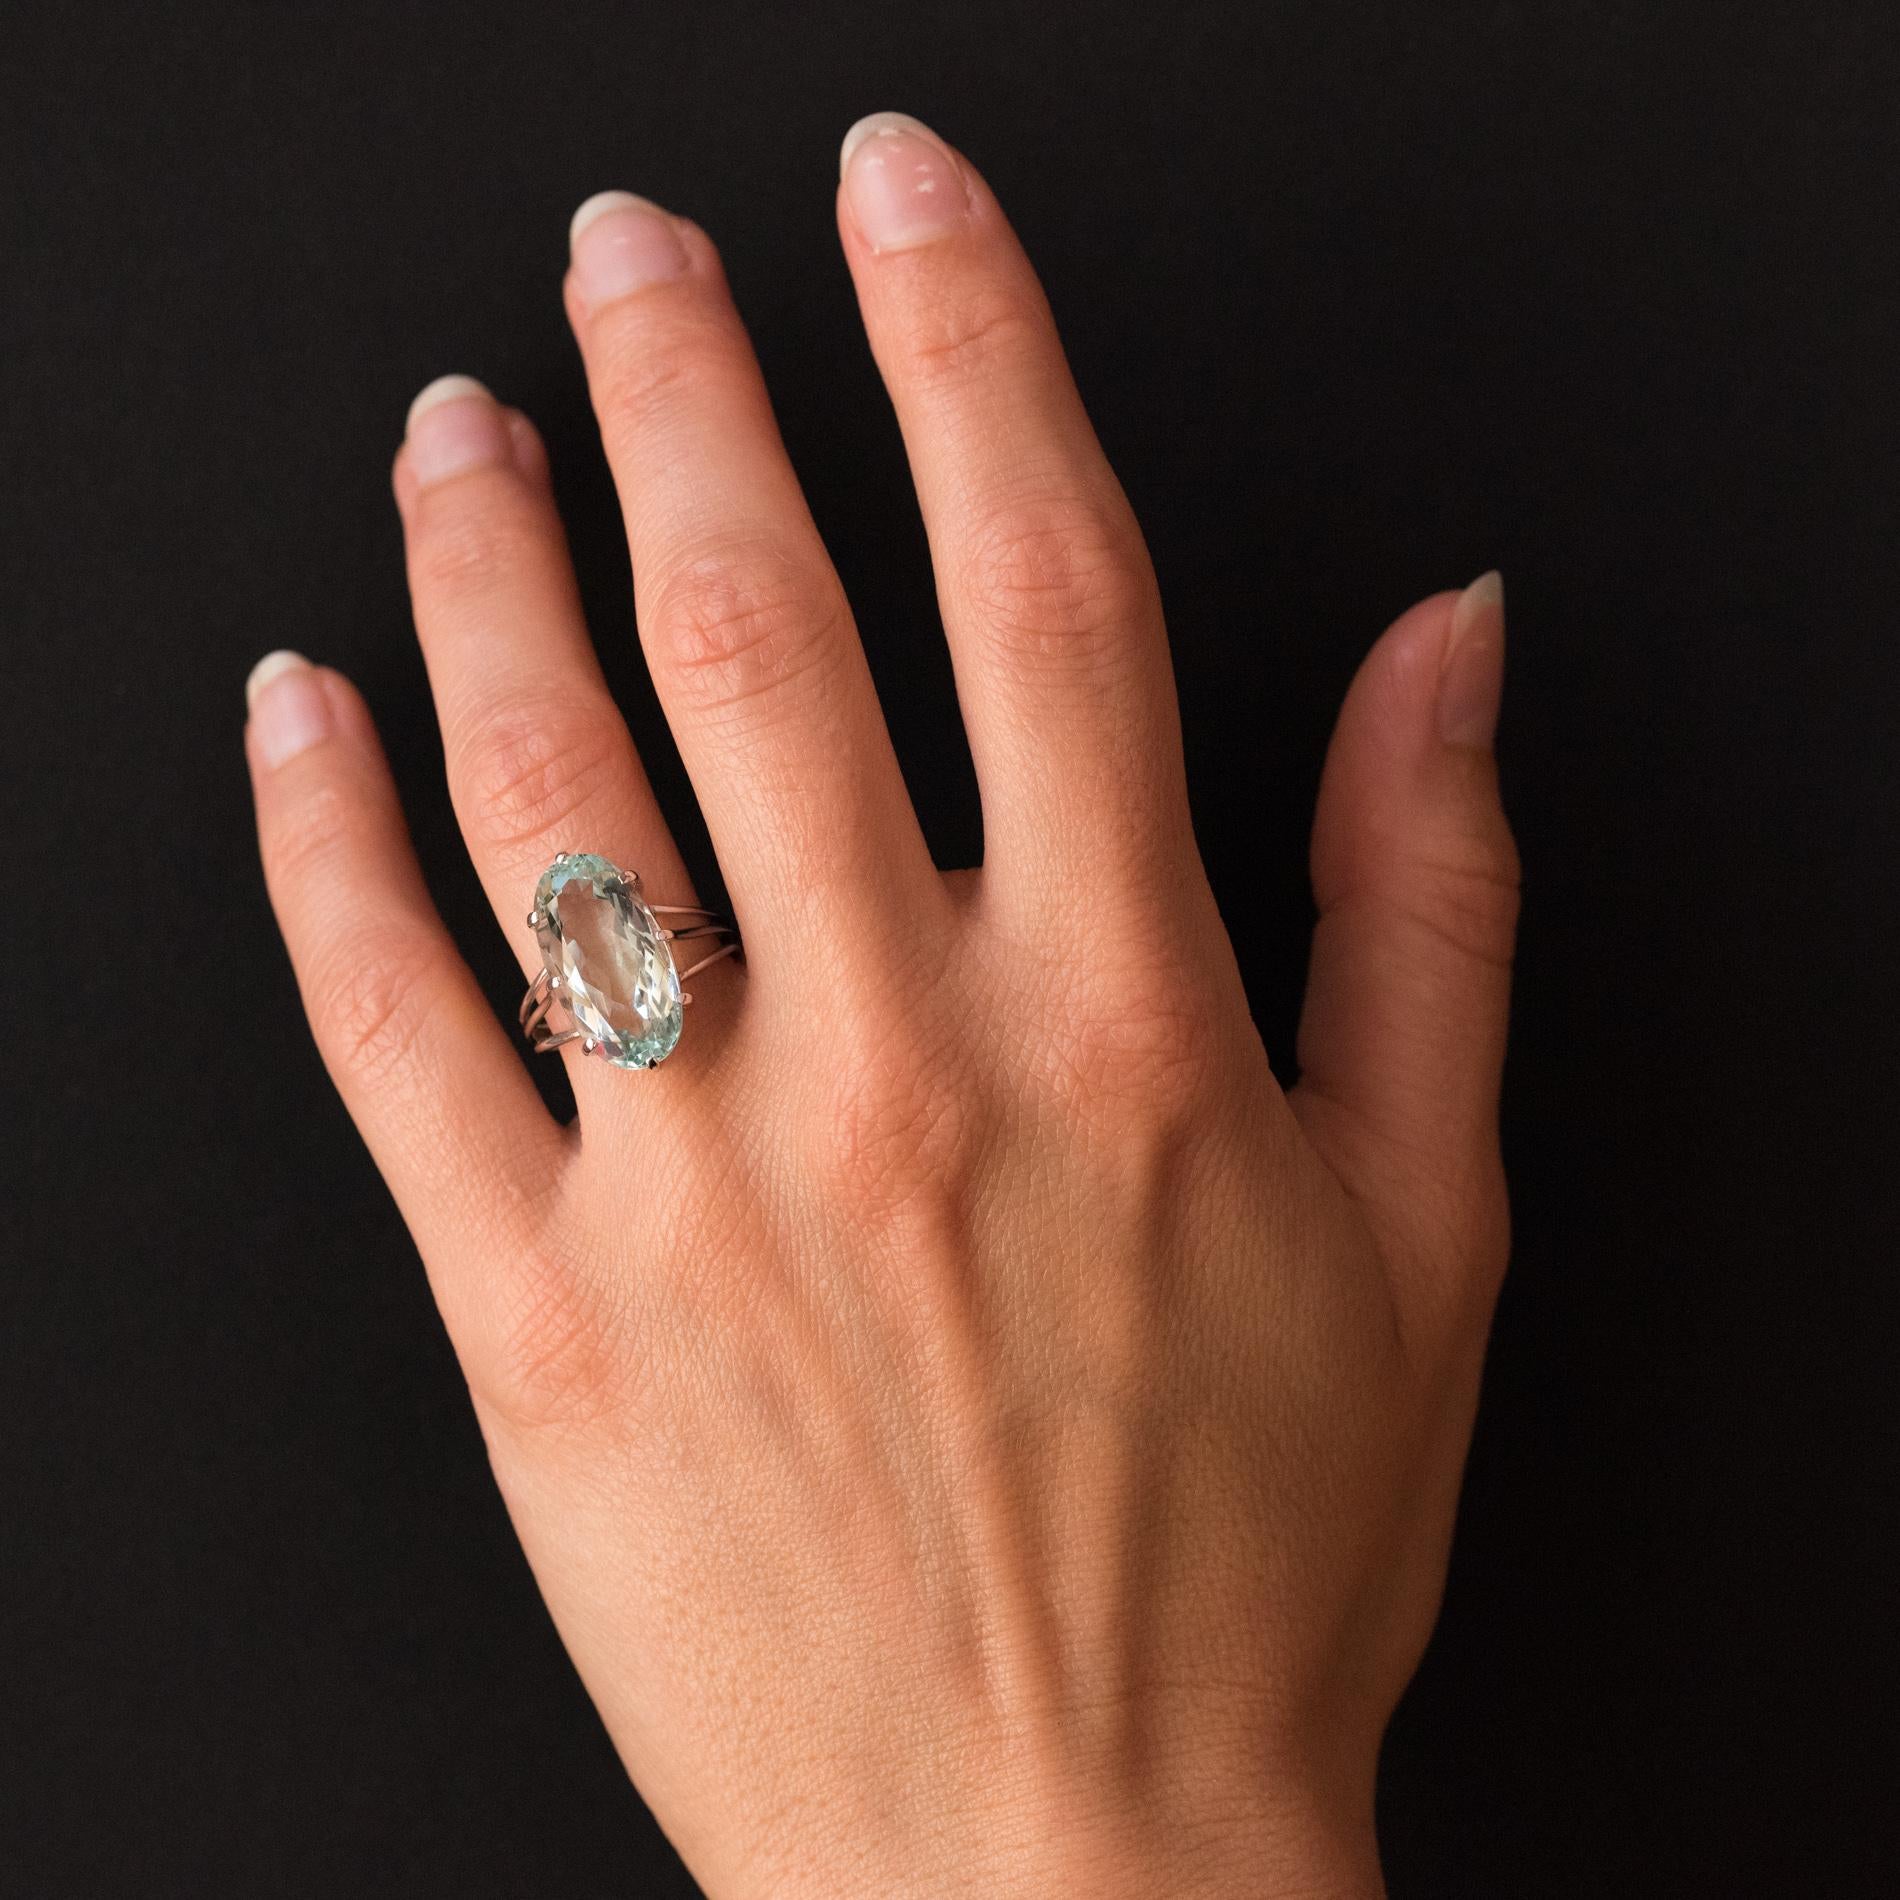 Ring in 18 karat white gold, eagle's head hallmark.
Characteristic of its time, this retro ring is set with claws on its top of an oval aquamarine. The mounting is made of three gold threads that meet at the base. The basket is openwork.
Total